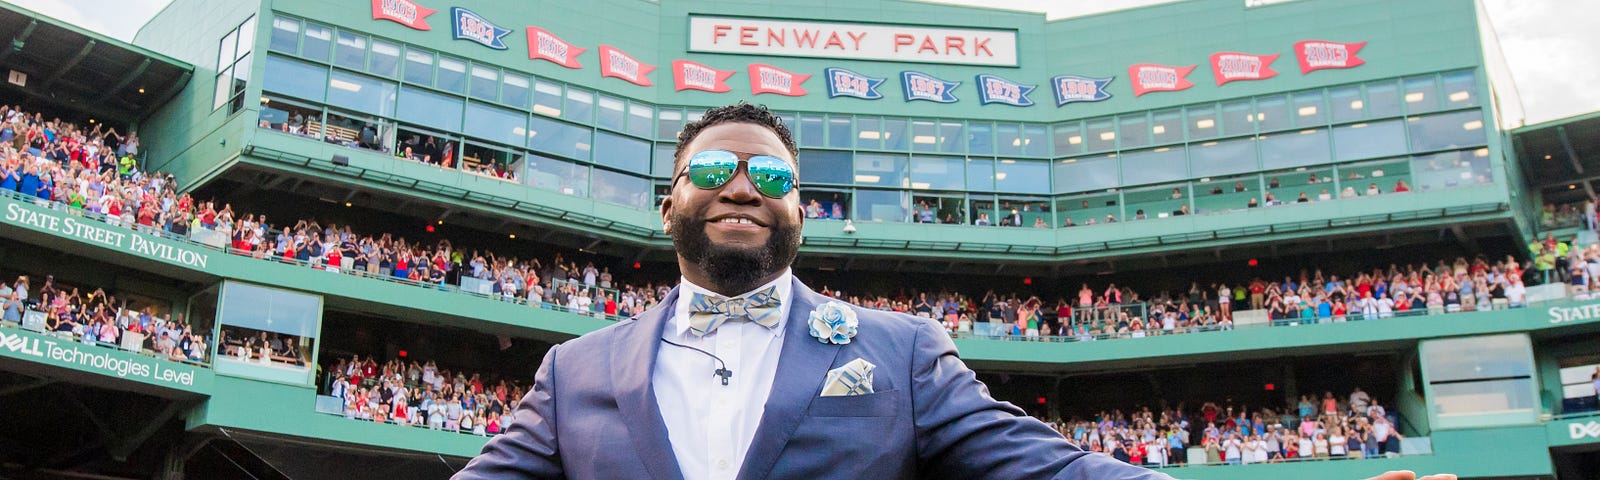 Red Sox Retire David Ortiz's Number 34, by Michael Ivins